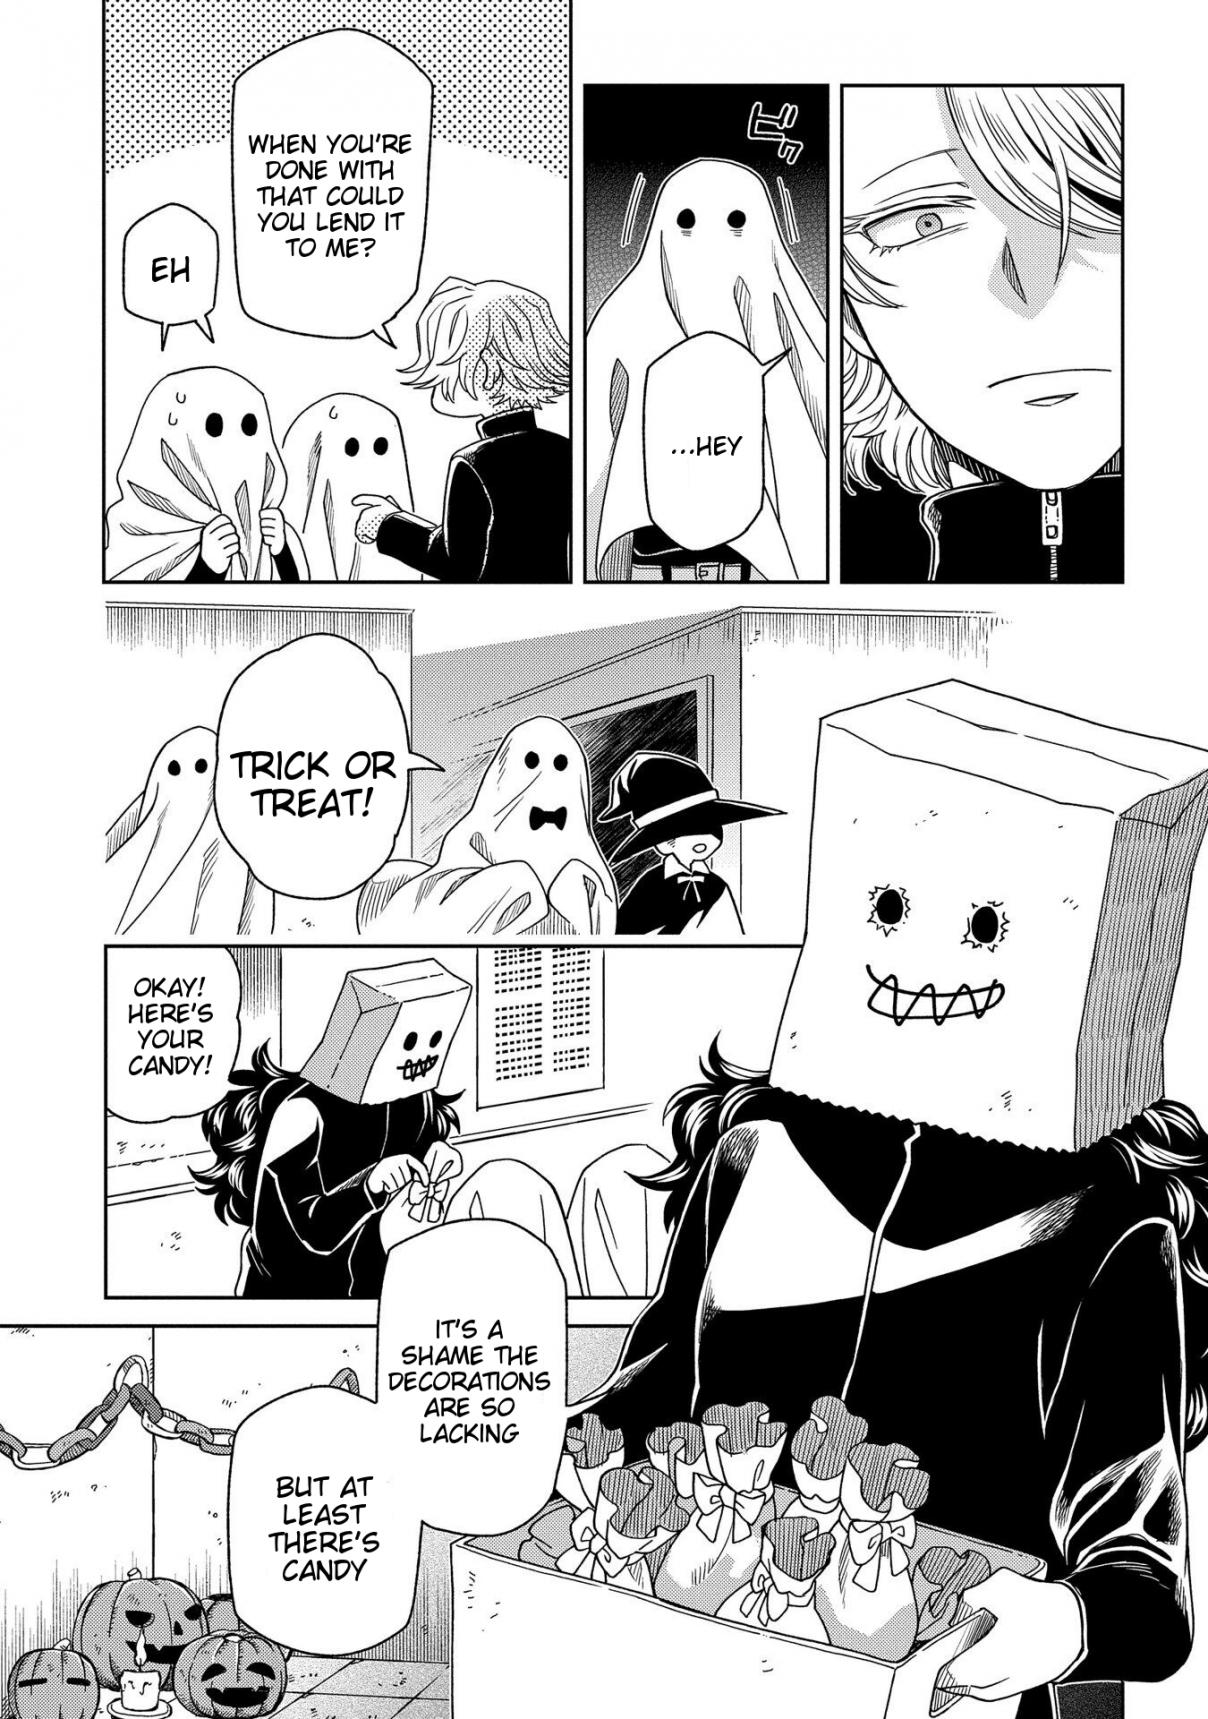 The Ancient Magus' Bride Vol. 14 Ch. 67 A small leak will sink a great ship. II